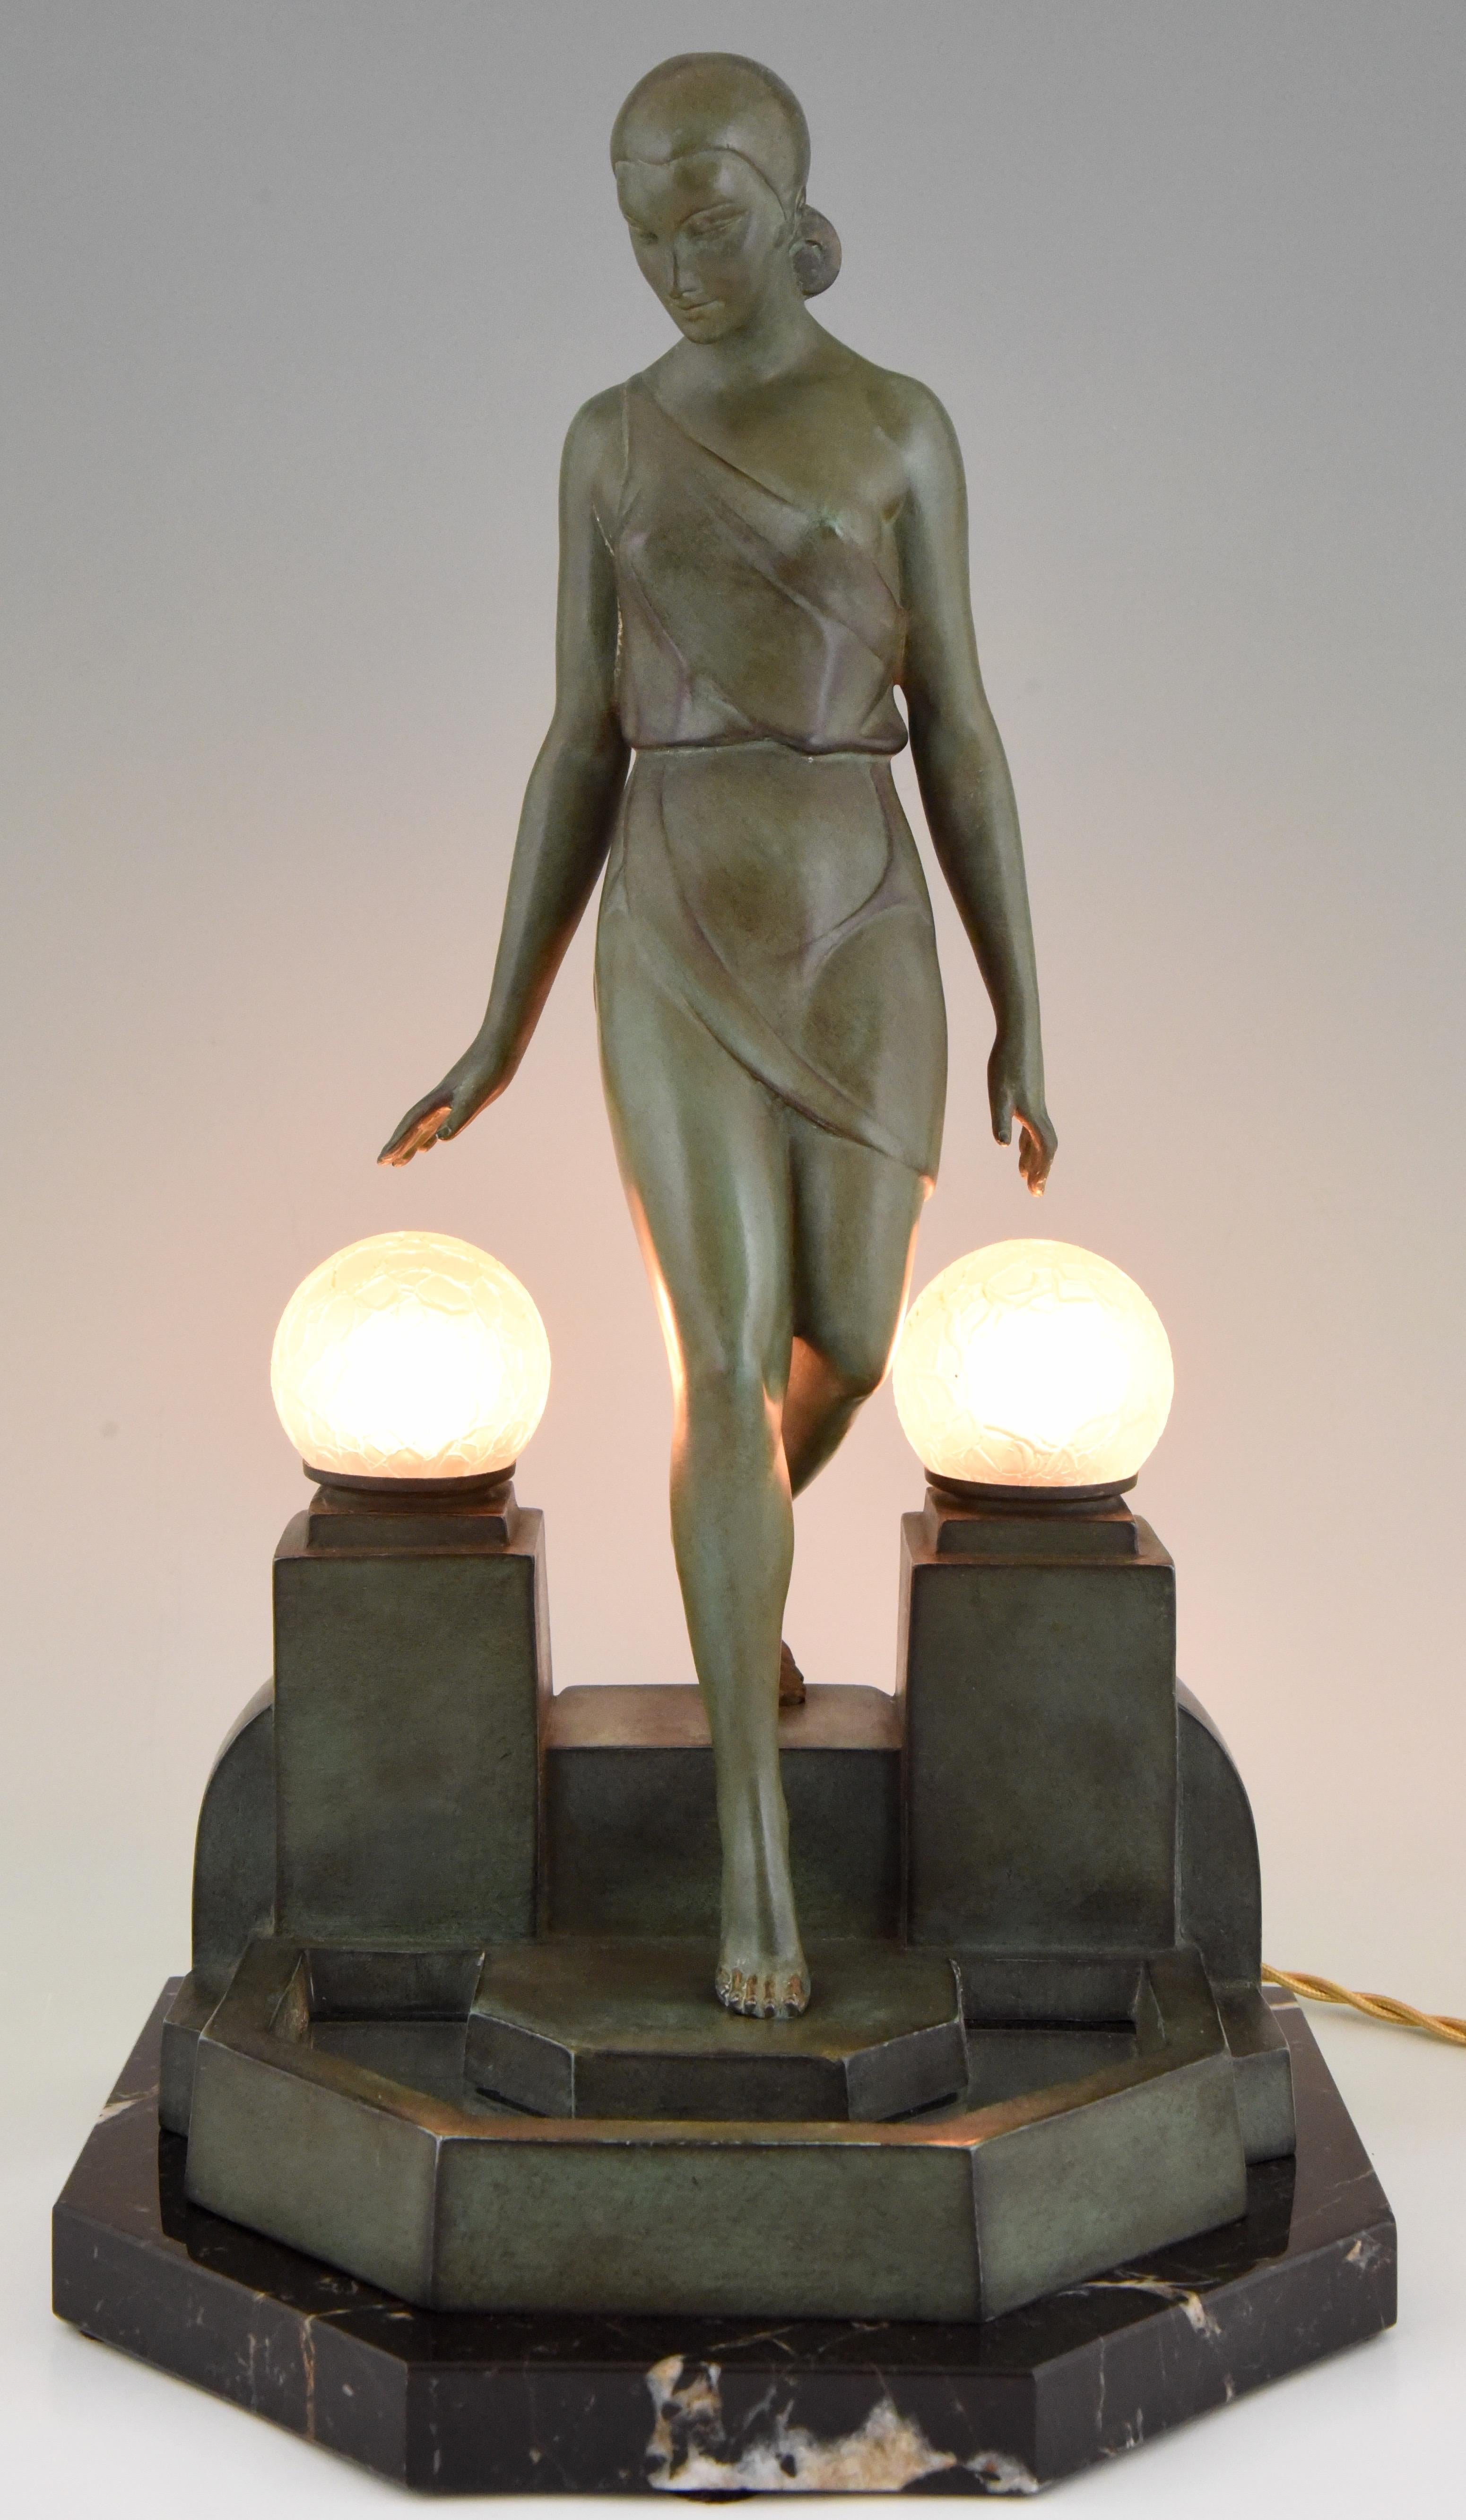 Stylish Art Deco sculptural table lamp by Pierre Le Faguays,
titled Nausicaa.
The lamp is a picturing a woman walking down a fountain, 
The sculpture is signed Fayral for Pierre Le Faguays and was cast by the Le Verrier foundry. The sculpture is